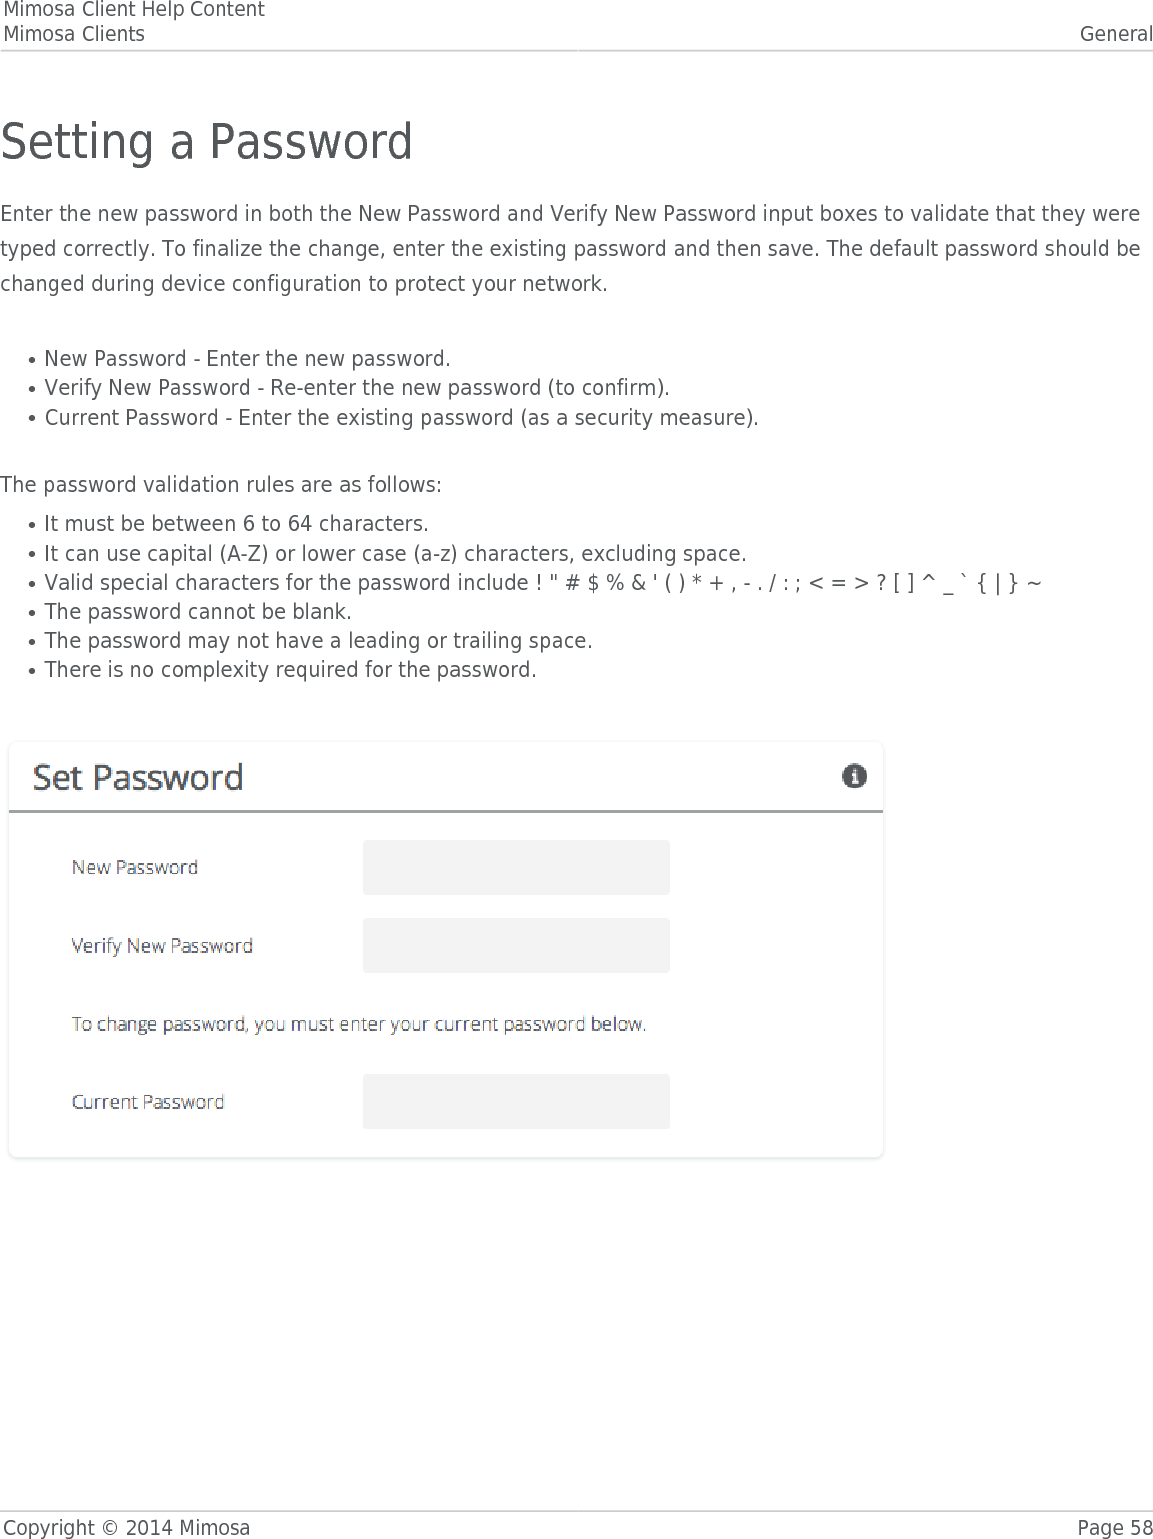 Mimosa Client Help ContentMimosa Clients GeneralCopyright © 2014 Mimosa Page 58Setting a PasswordEnter the new password in both the New Password and Verify New Password input boxes to validate that they weretyped correctly. To finalize the change, enter the existing password and then save. The default password should bechanged during device configuration to protect your network. New Password - Enter the new password.●Verify New Password - Re-enter the new password (to confirm).●Current Password - Enter the existing password (as a security measure).●The password validation rules are as follows:It must be between 6 to 64 characters.●It can use capital (A-Z) or lower case (a-z) characters, excluding space.●Valid special characters for the password include ! &quot; # $ % &amp; &apos; ( ) * + , - . / : ; &lt; = &gt; ? [ ] ^ _ ` { | } ~●The password cannot be blank.●The password may not have a leading or trailing space.●There is no complexity required for the password.● 